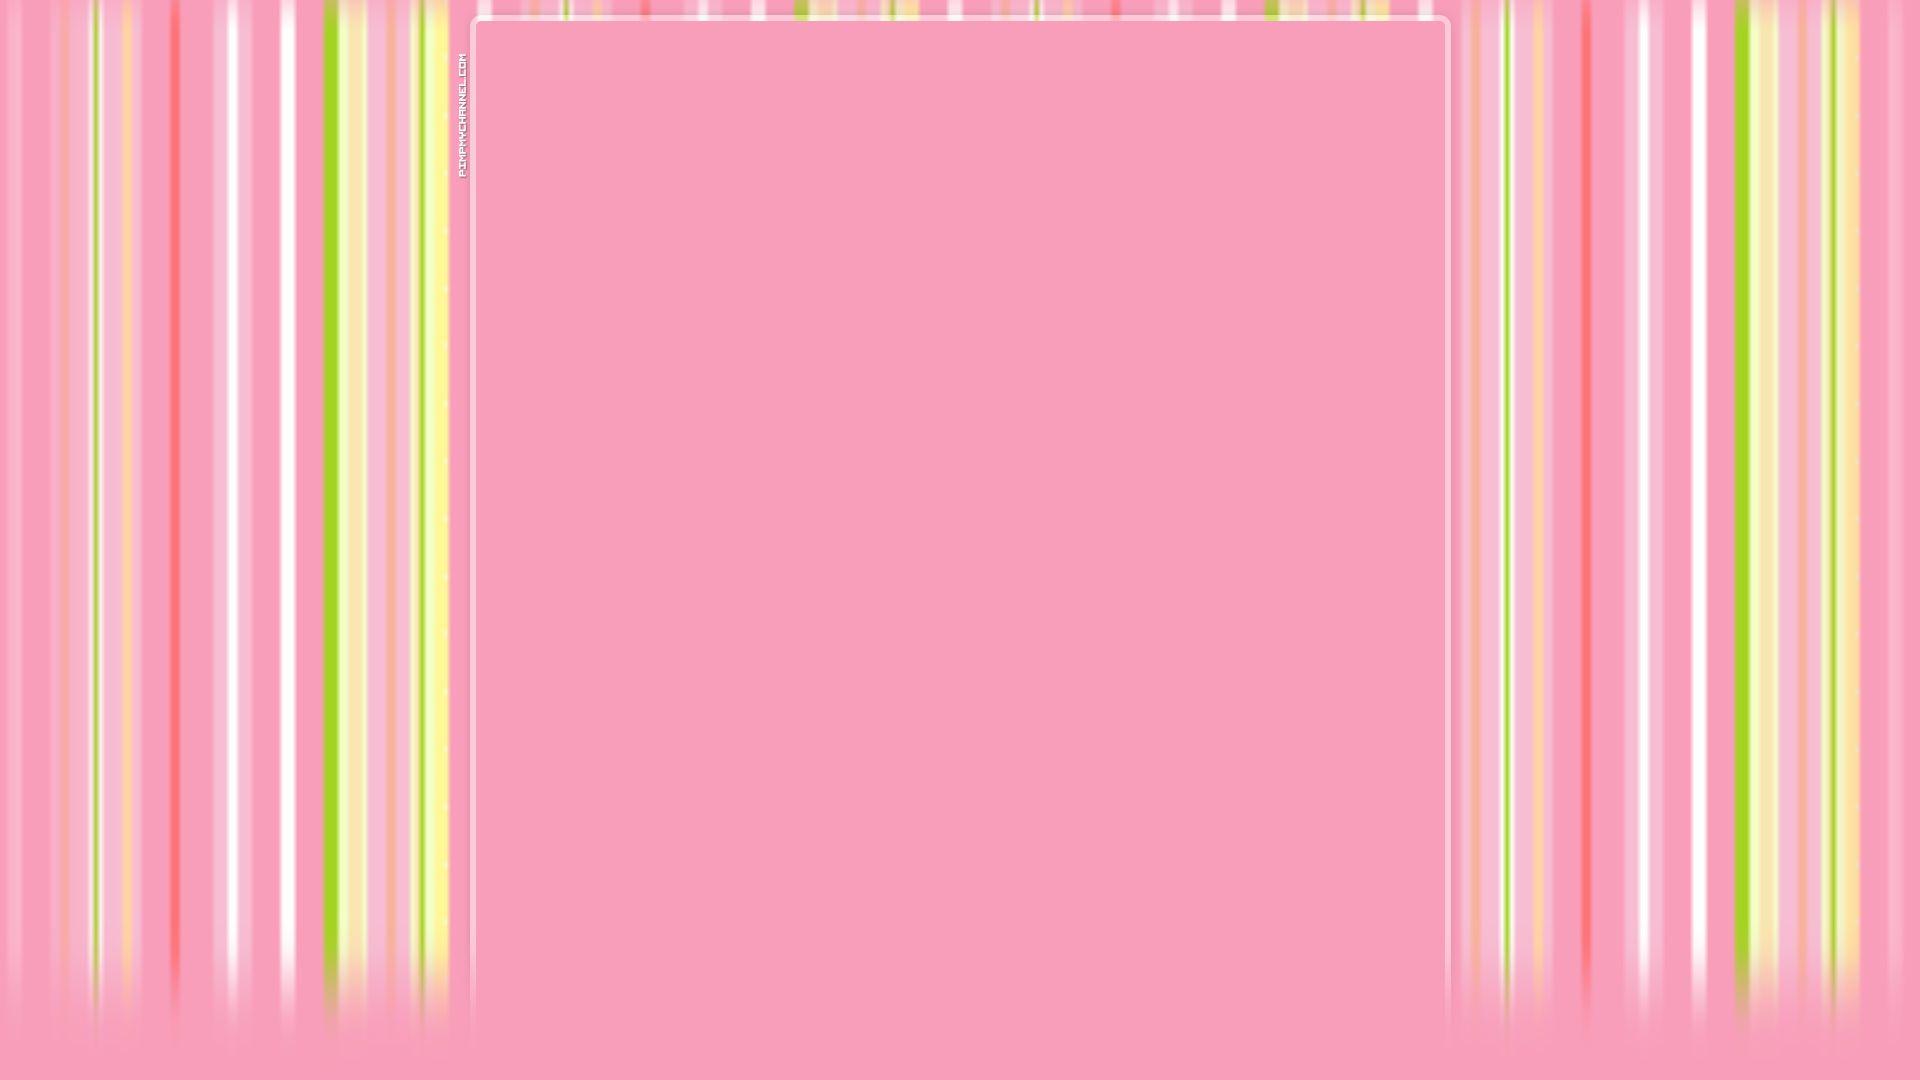 Simple Pink Wallpaper (Picture)